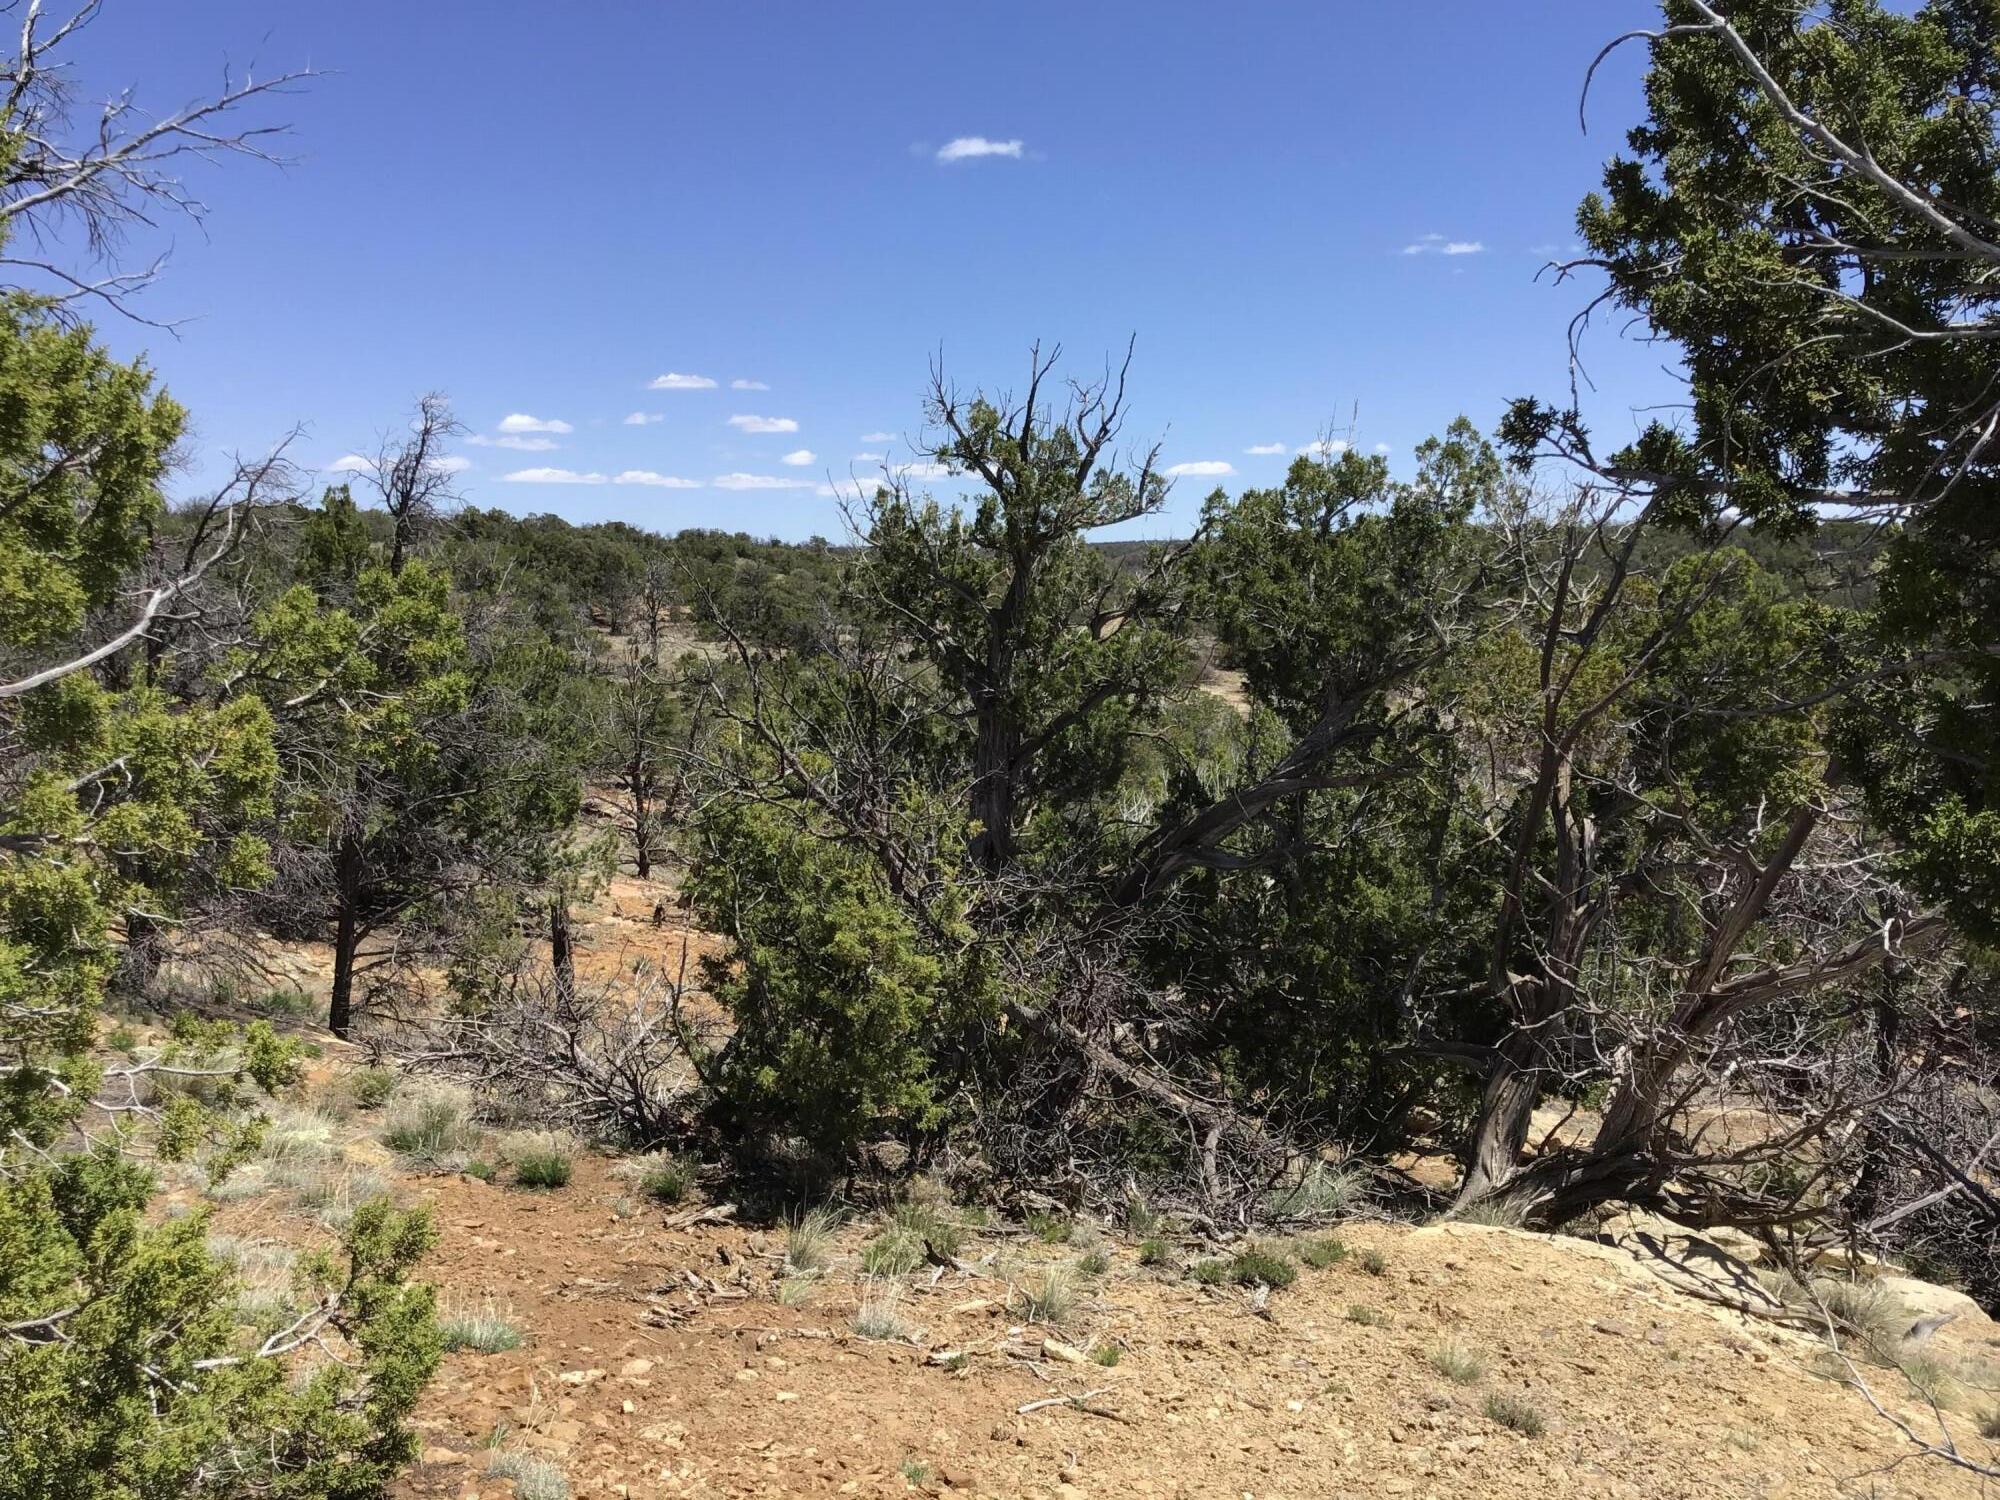 Lot 207 Meadow Drive, Ramah, New Mexico 87321, ,Land,For Sale,Lot 207 Meadow Drive,1059202